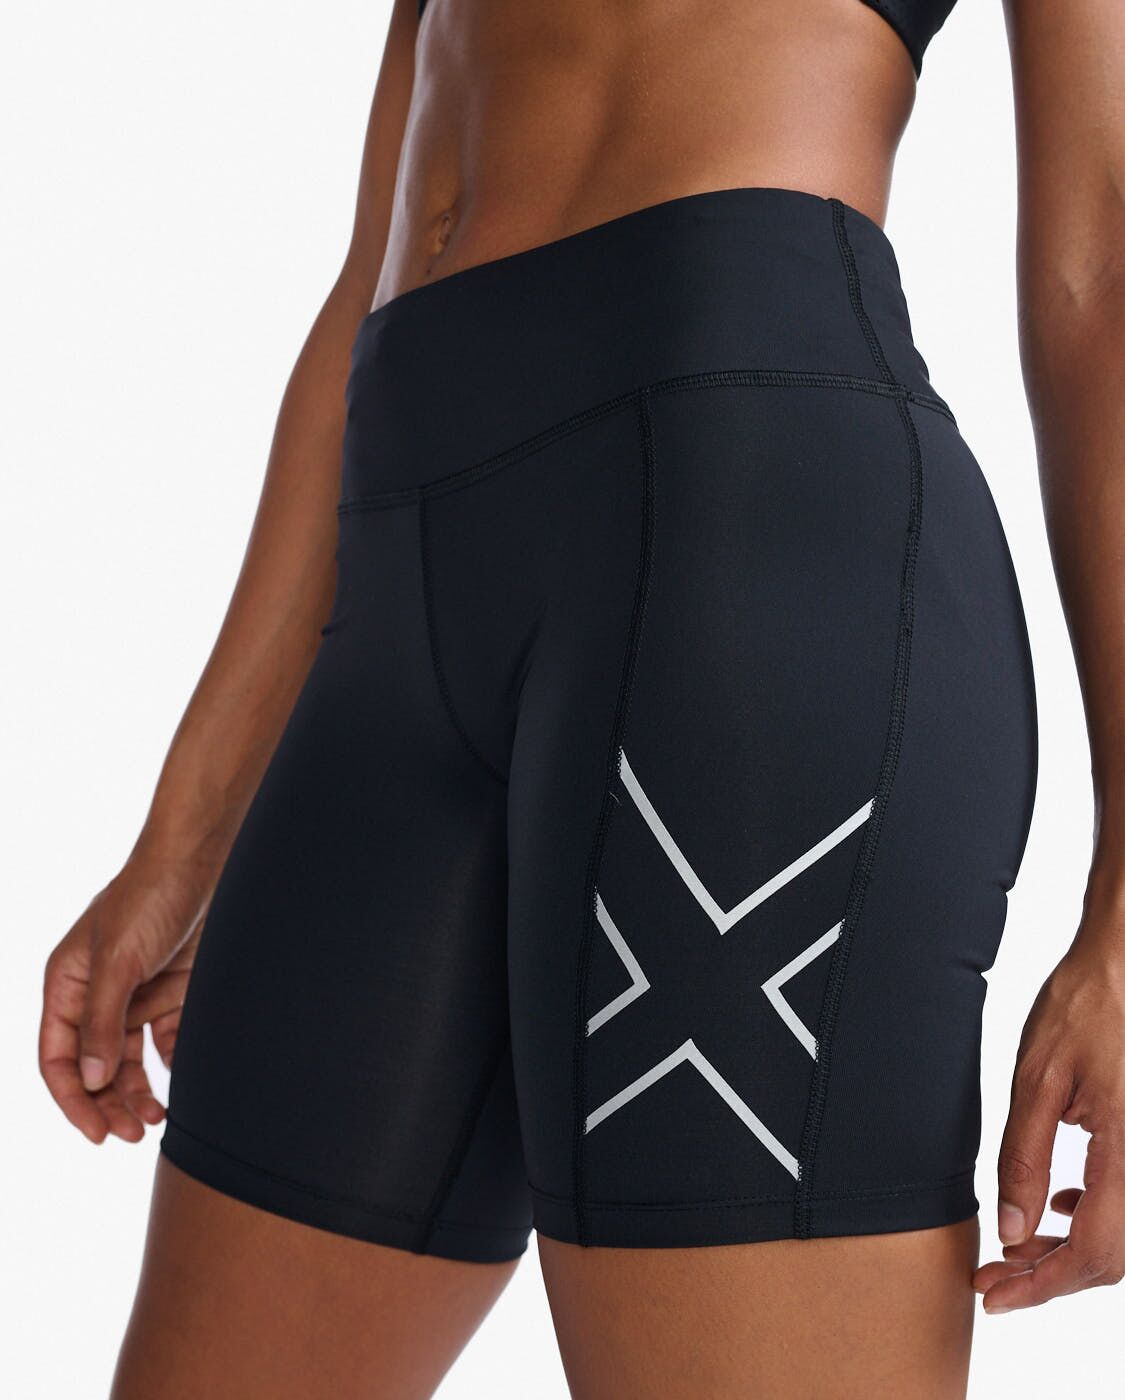 2XU South Africa - Womens Aero Mid-Rise Compression 6 inch Shorts - Black/Silver Reflective